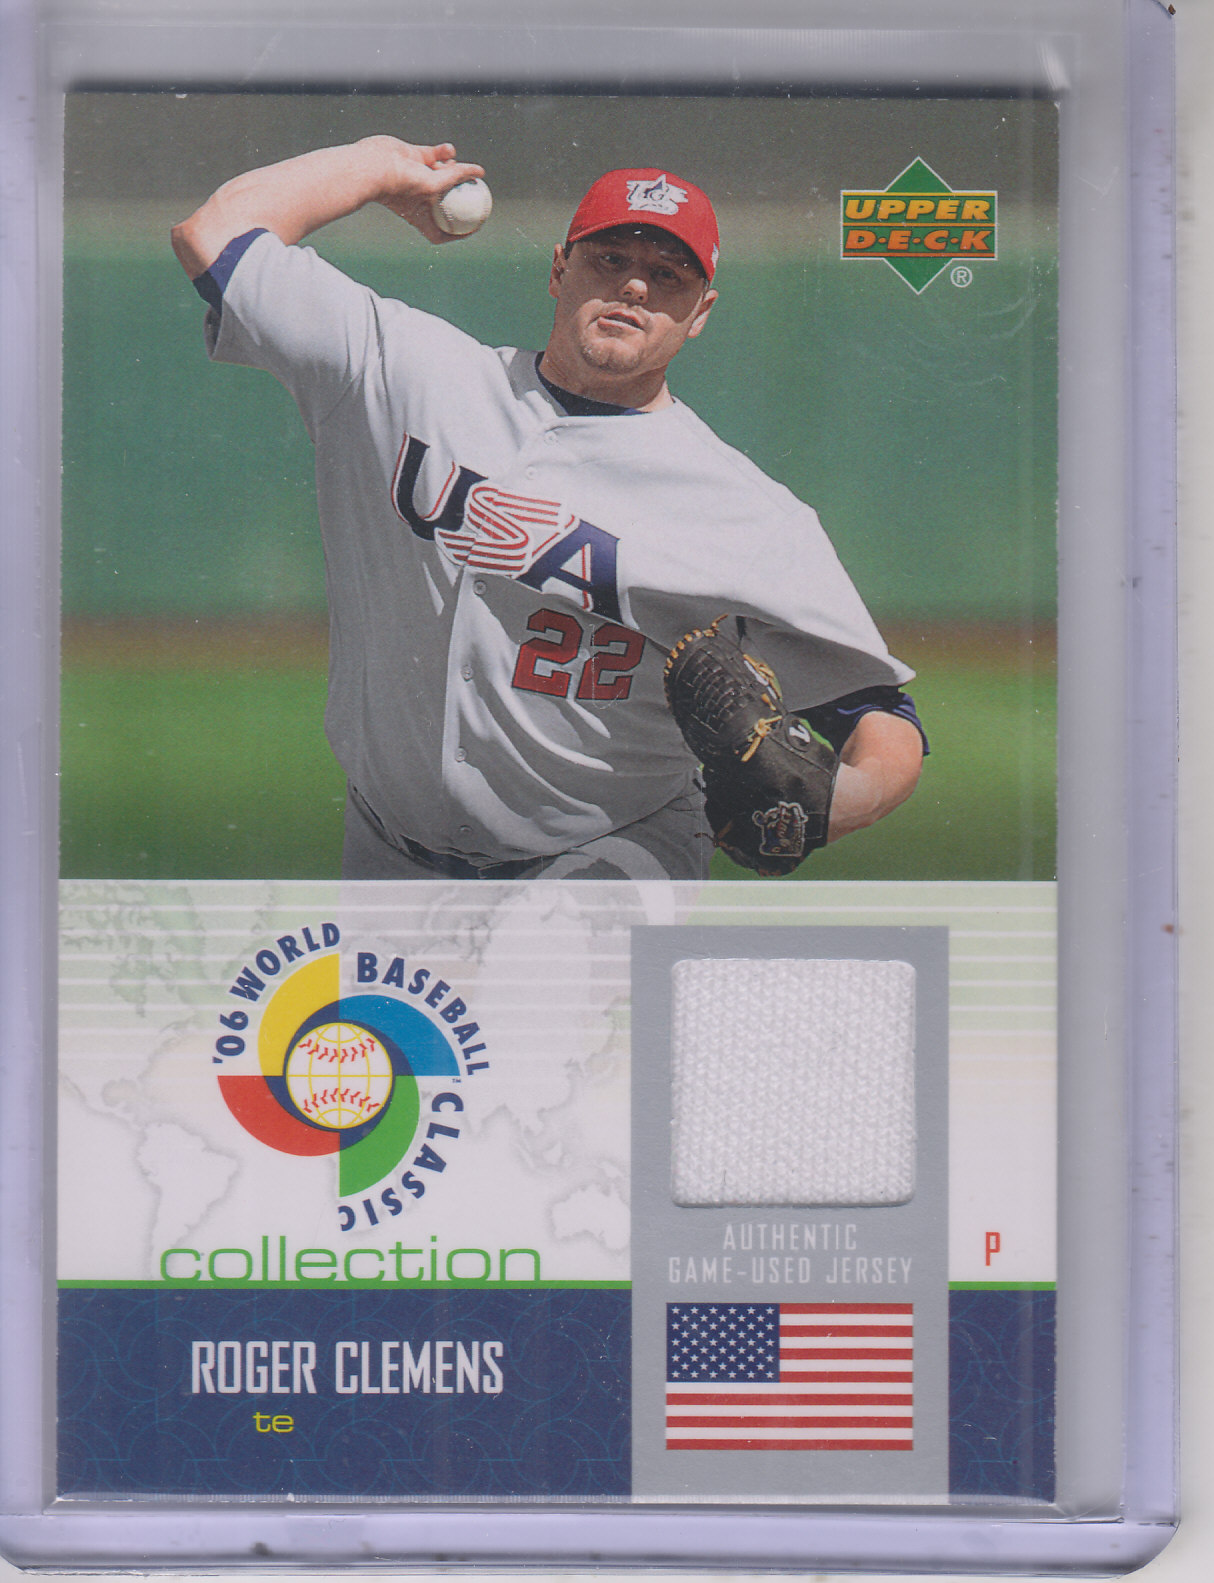 2006 Upper Deck WBC Collection Jersey #RC Roger Clemens